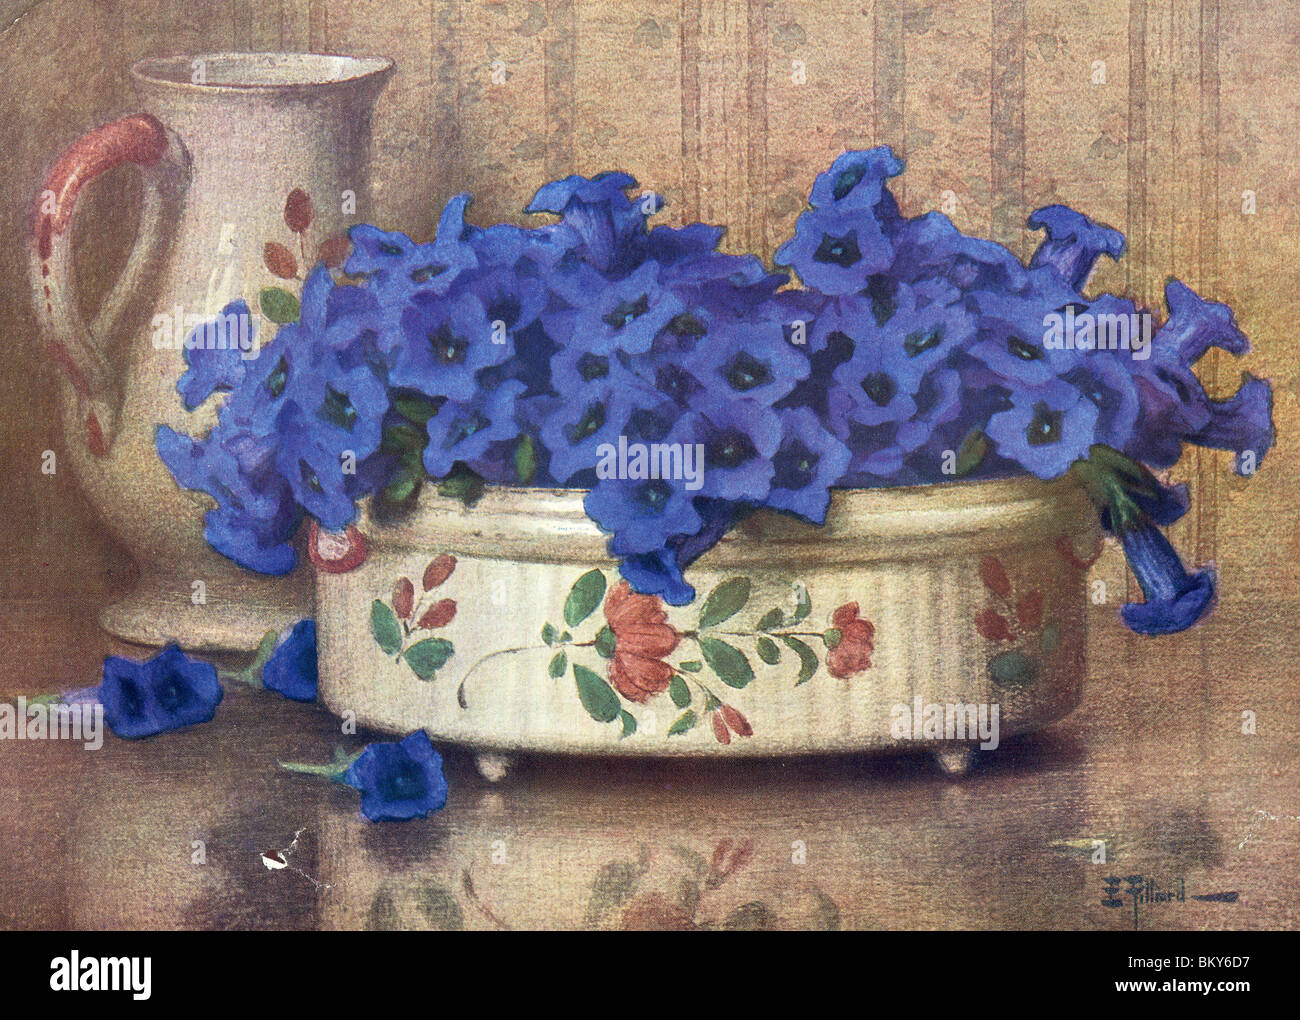 Blue Gentian in a Decorative Bowl Stock Photo